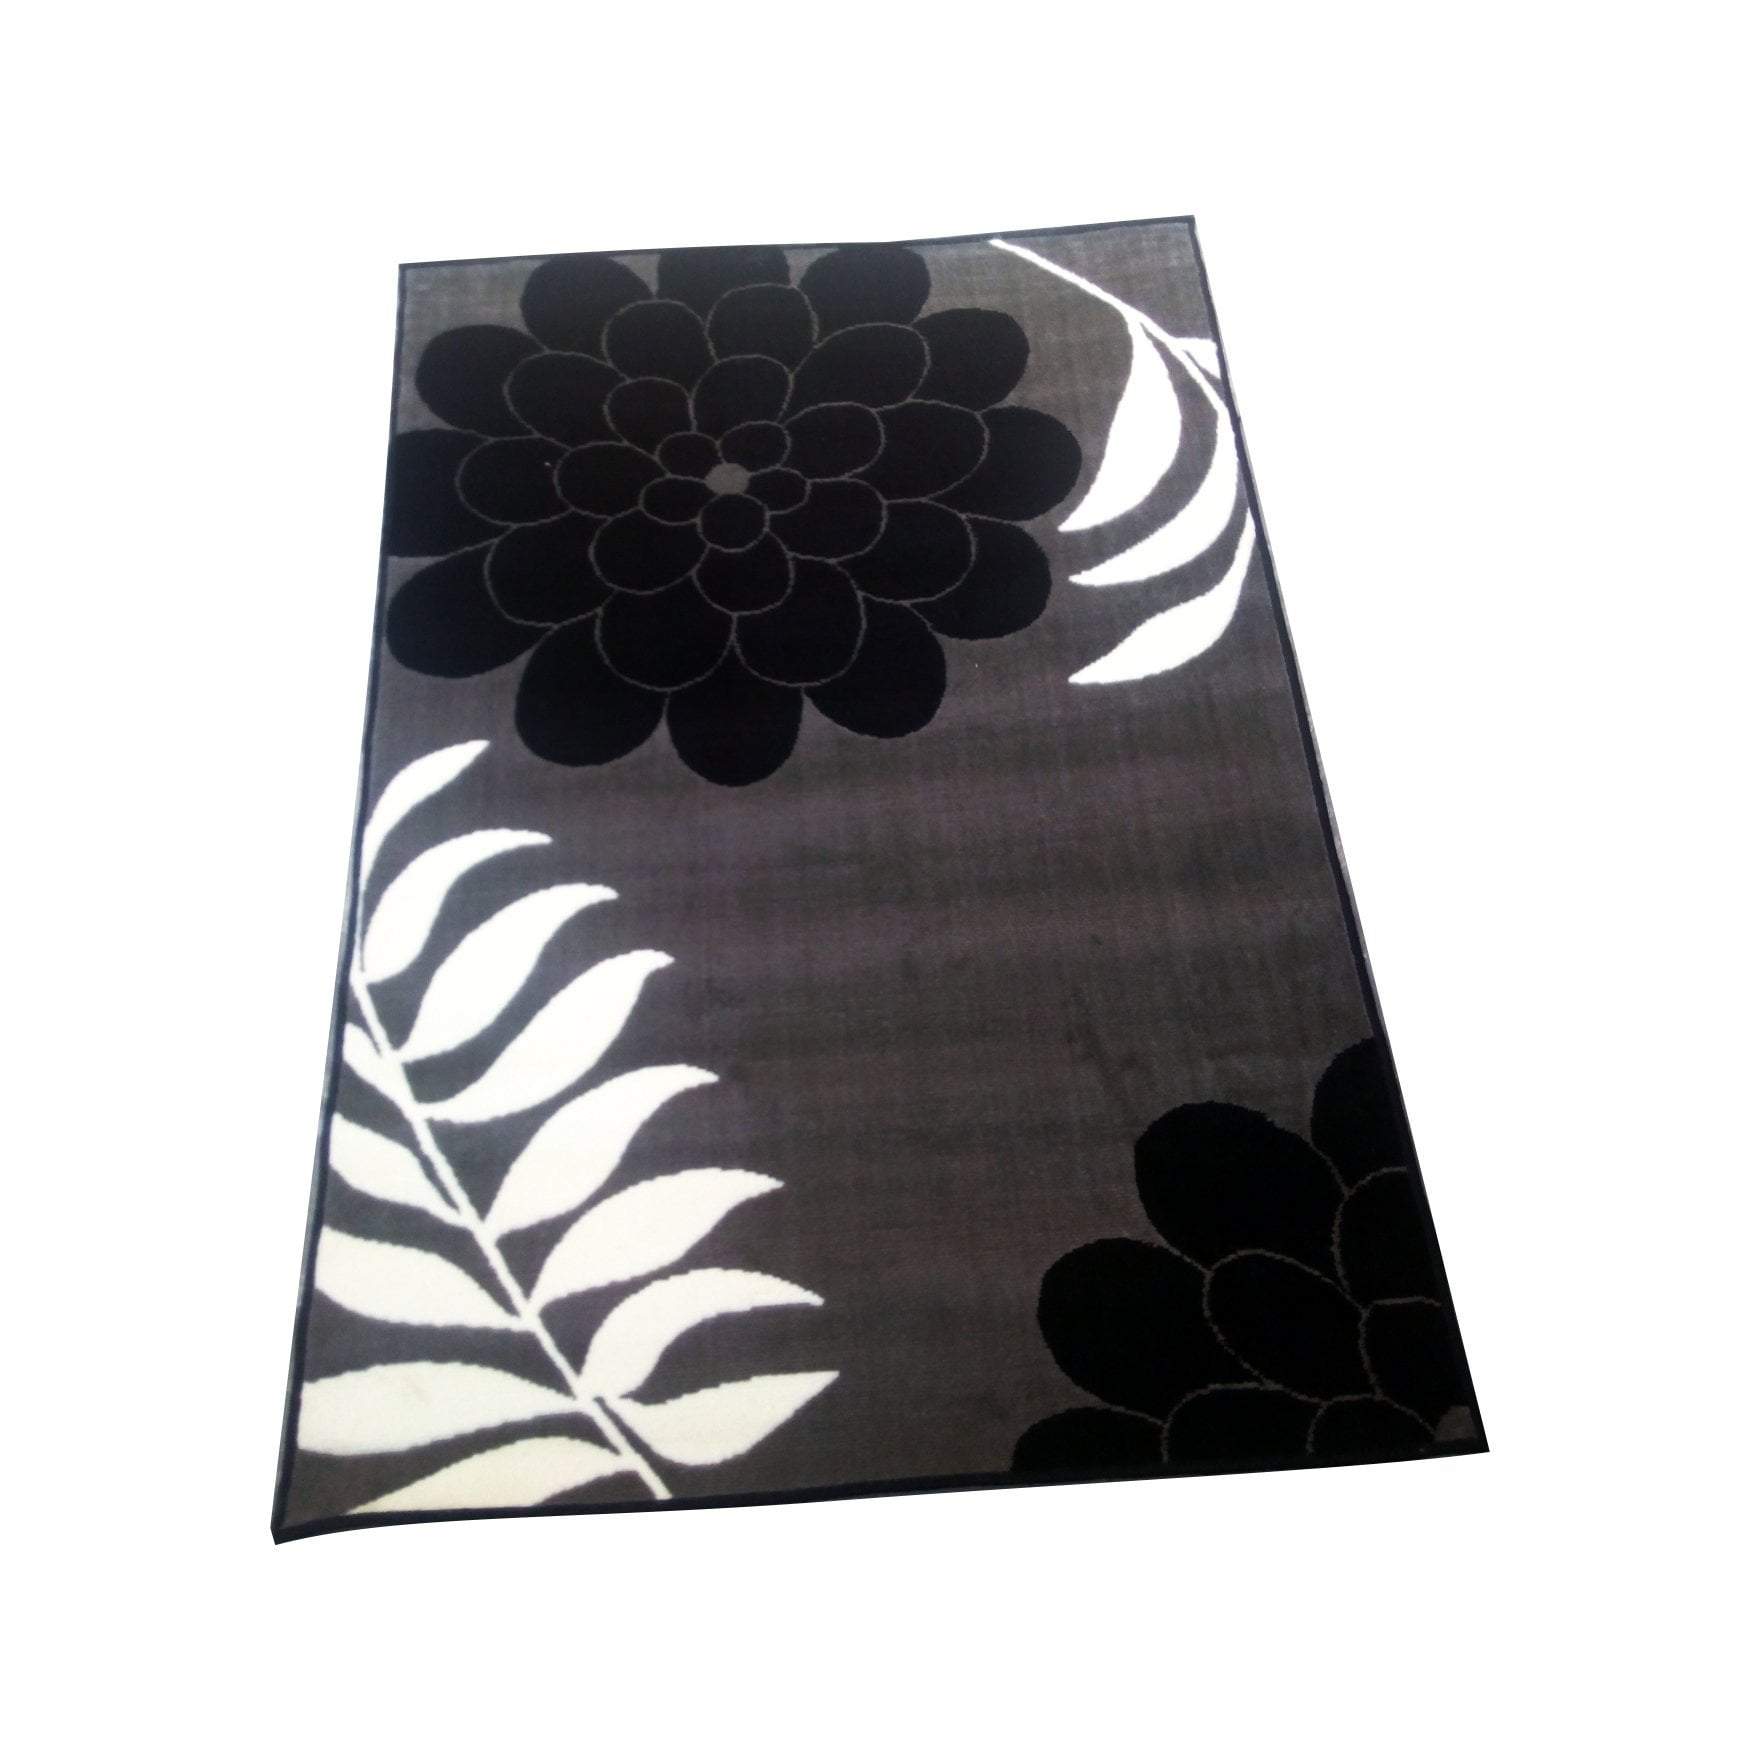 Centre Rug - 50128 Black Feather Series